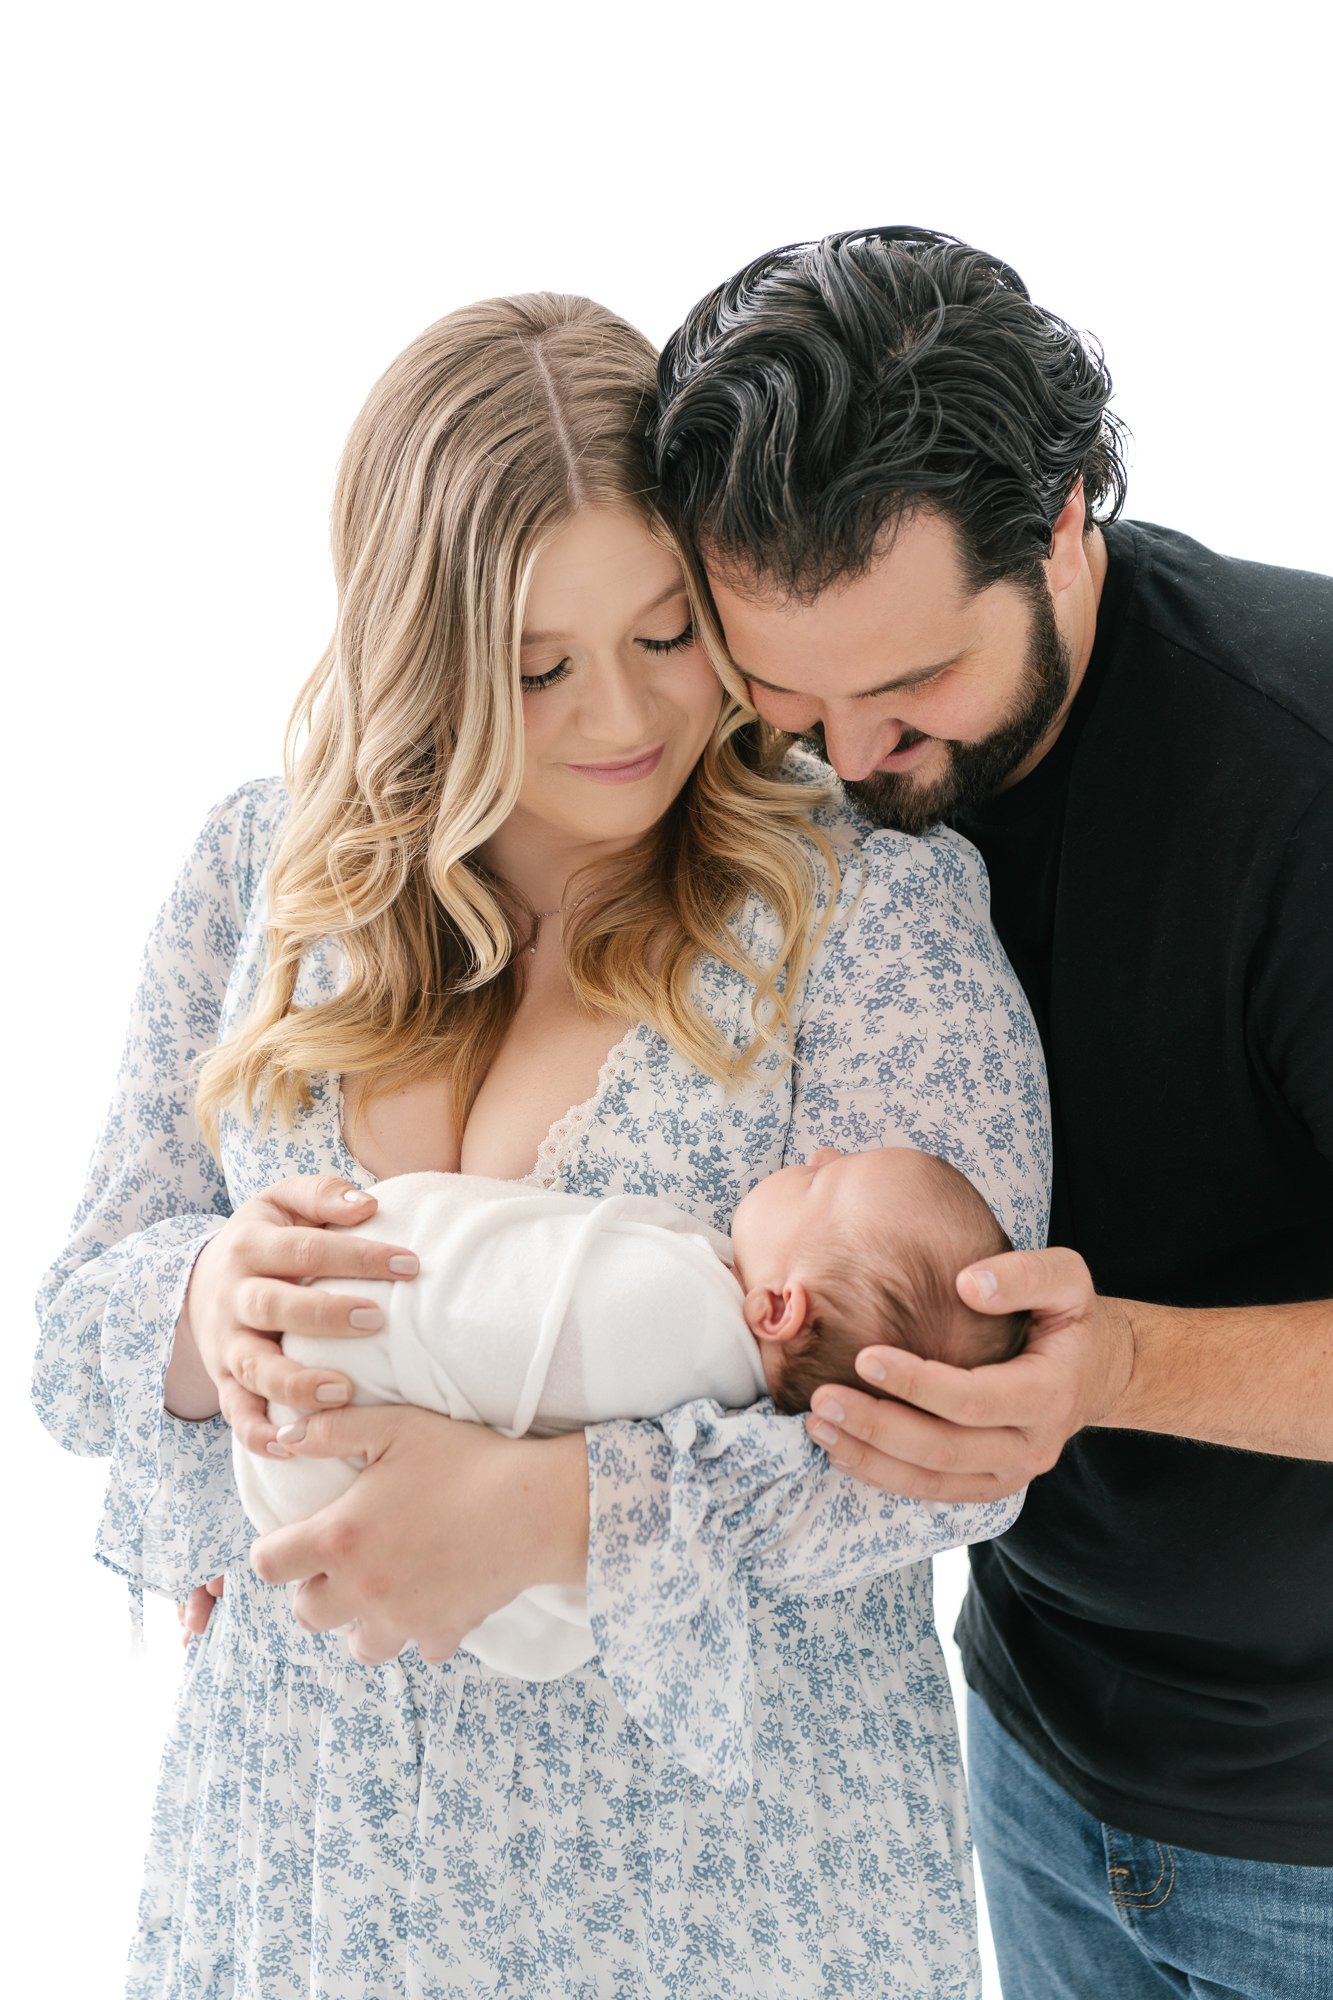  Parents stand shoulder to shoulder while mom holds young baby in this timeless portrait. Dad has a  smile on his face while looking at newborn baby in New Jersey studio session shot by Nicole Hawkins Photography. #newbornportraits #newbornstudioshoo